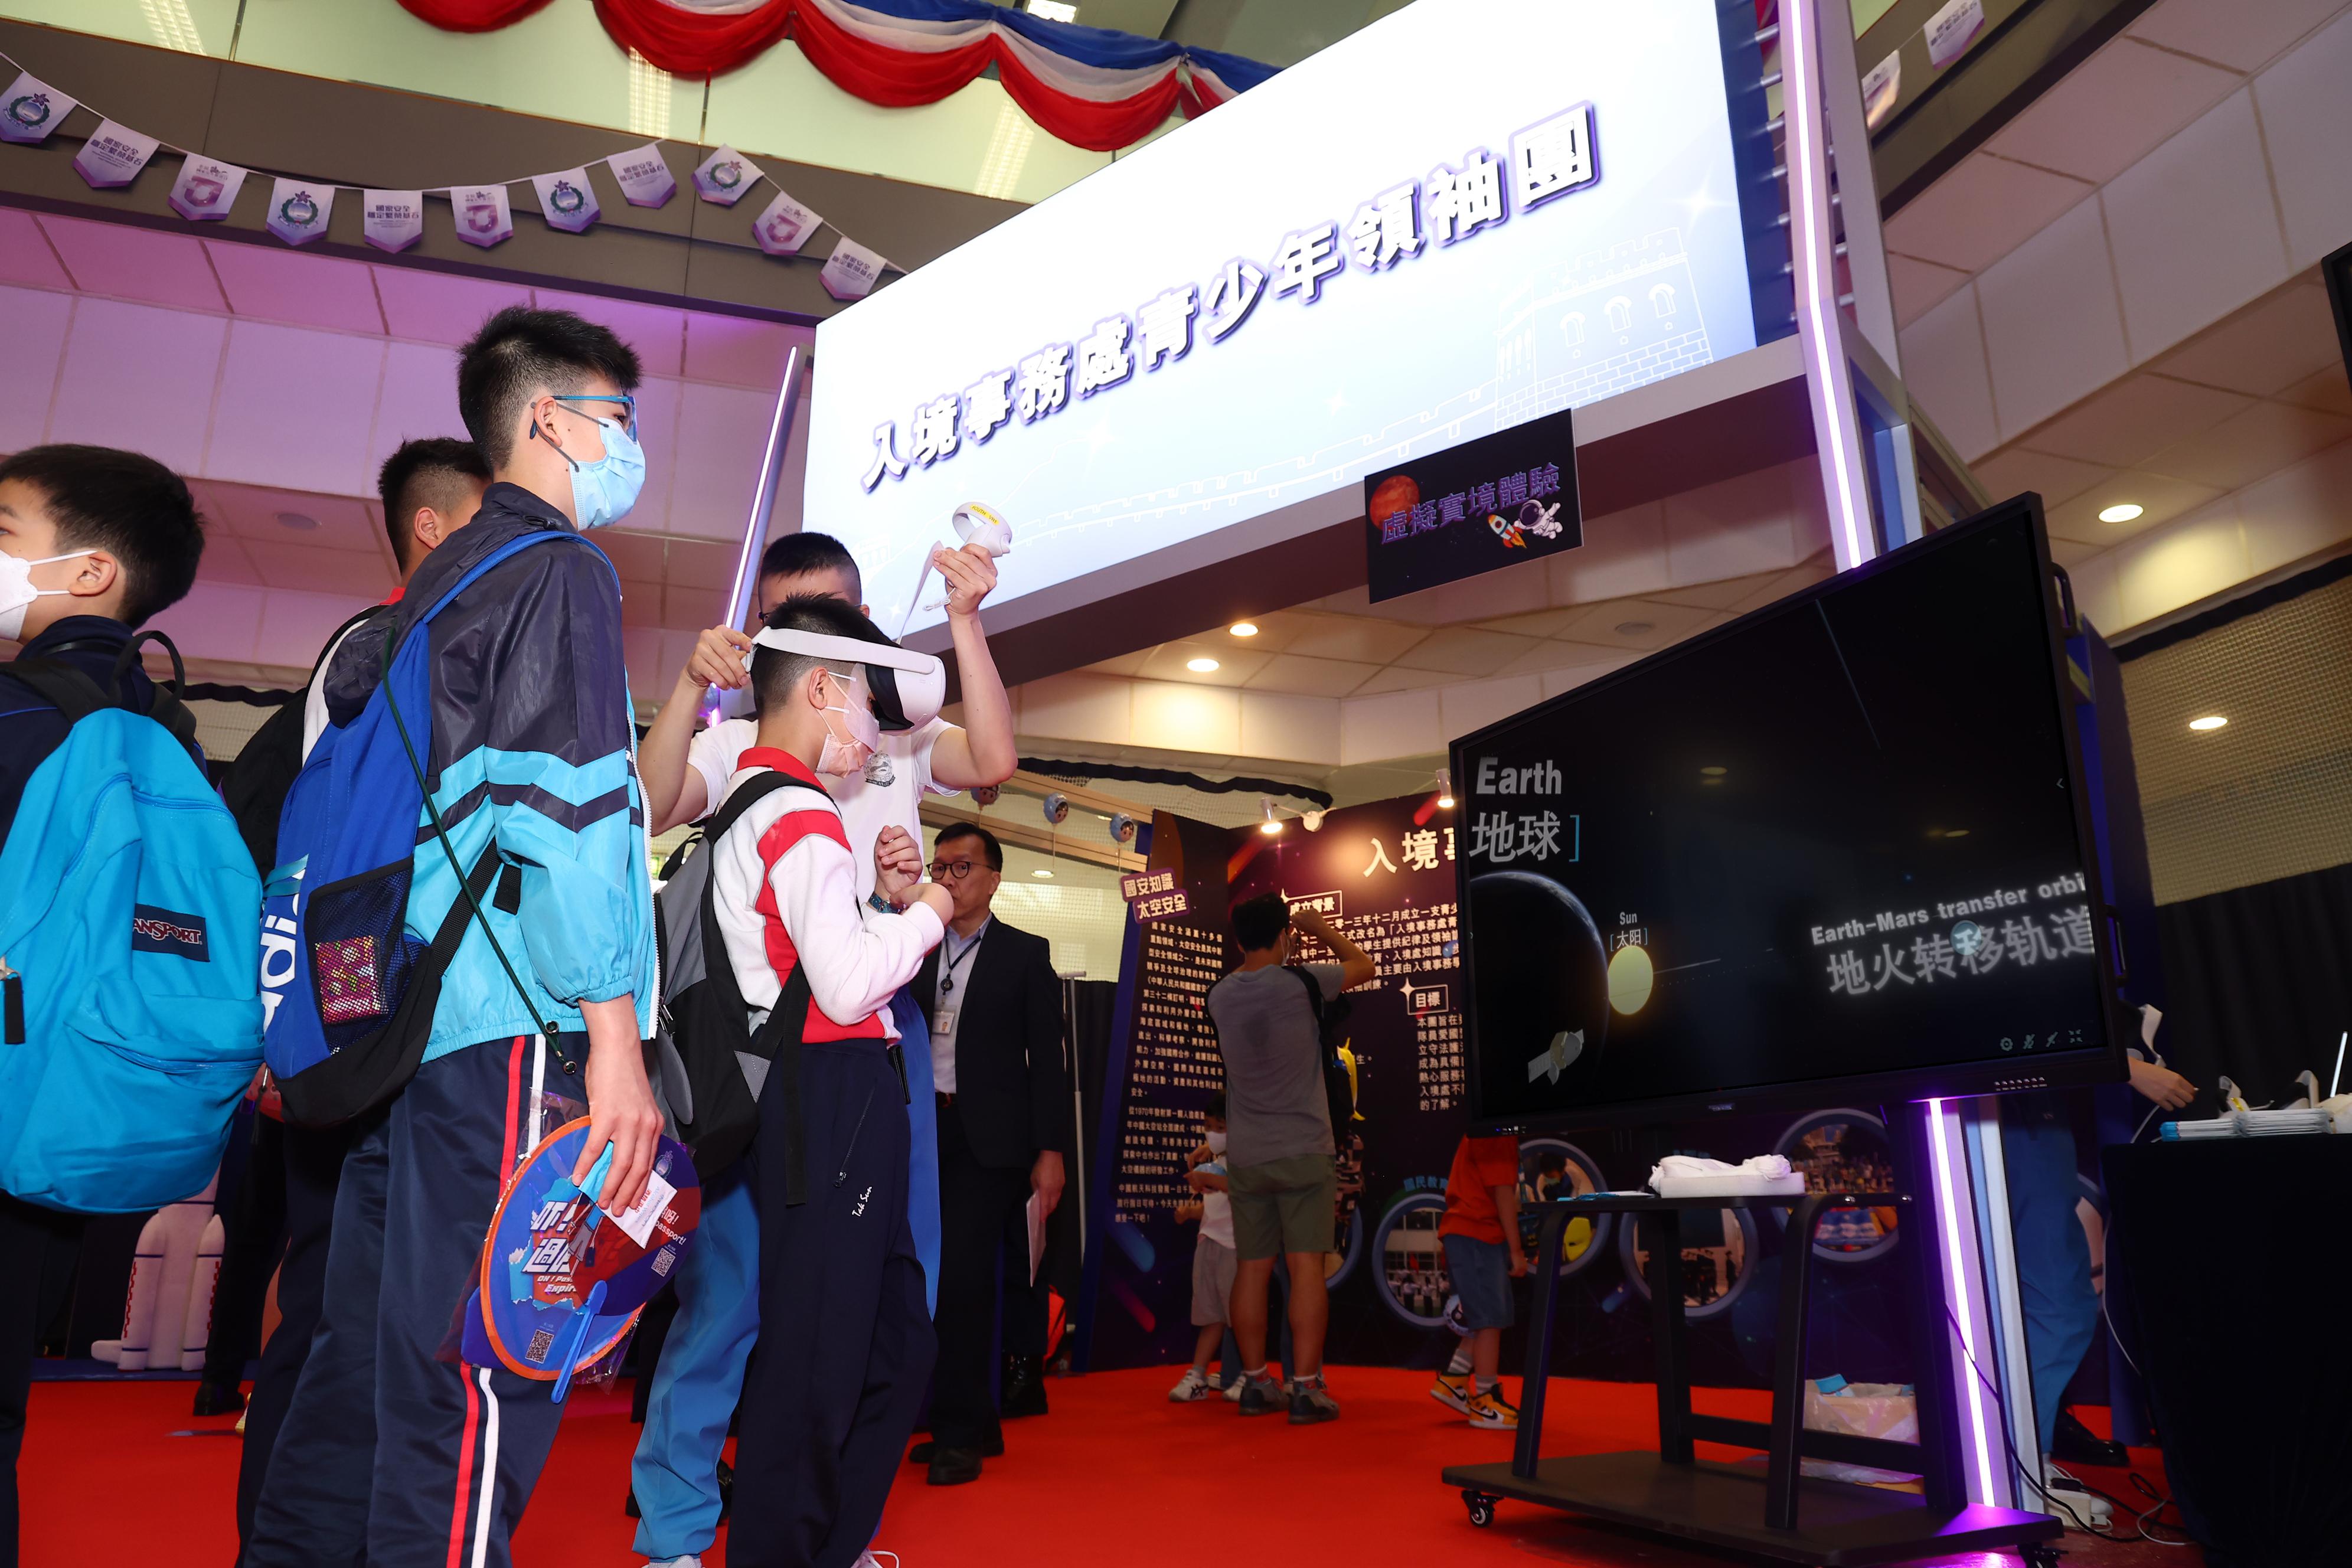 To support the National Security Education Day, the Immigration Service Institute of Training and Development held an open day today (April 15). Photo shows the members of the Immigration Department Youth Leaders Corps were assisting members of the public to experience virtual reality in the major field of "outer space security".